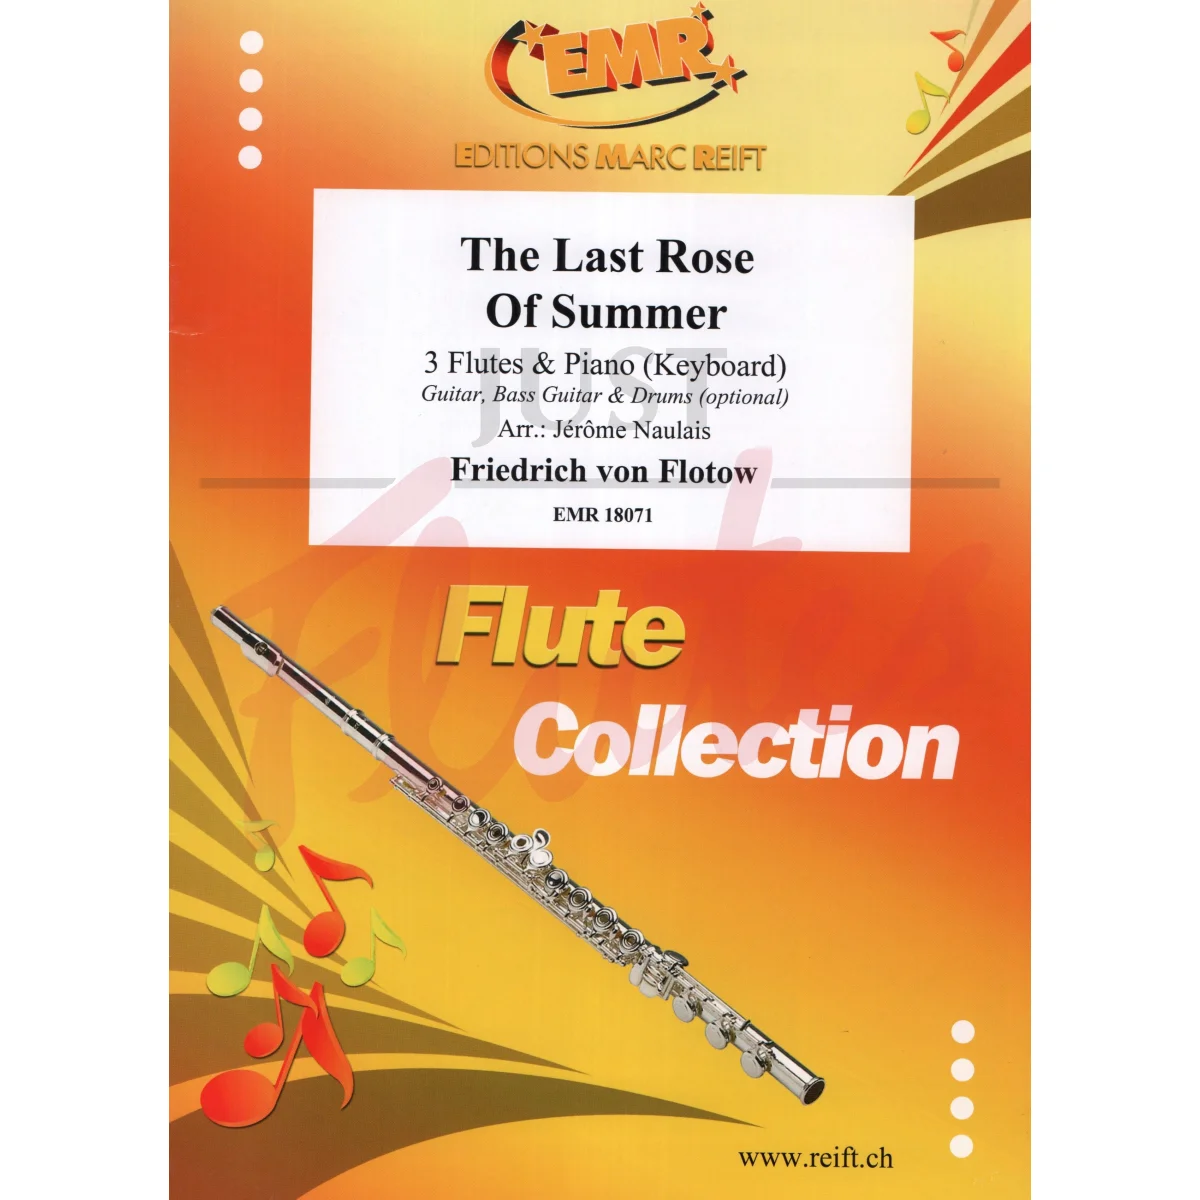 The Last Rose of Summer for Three Flutes and Piano